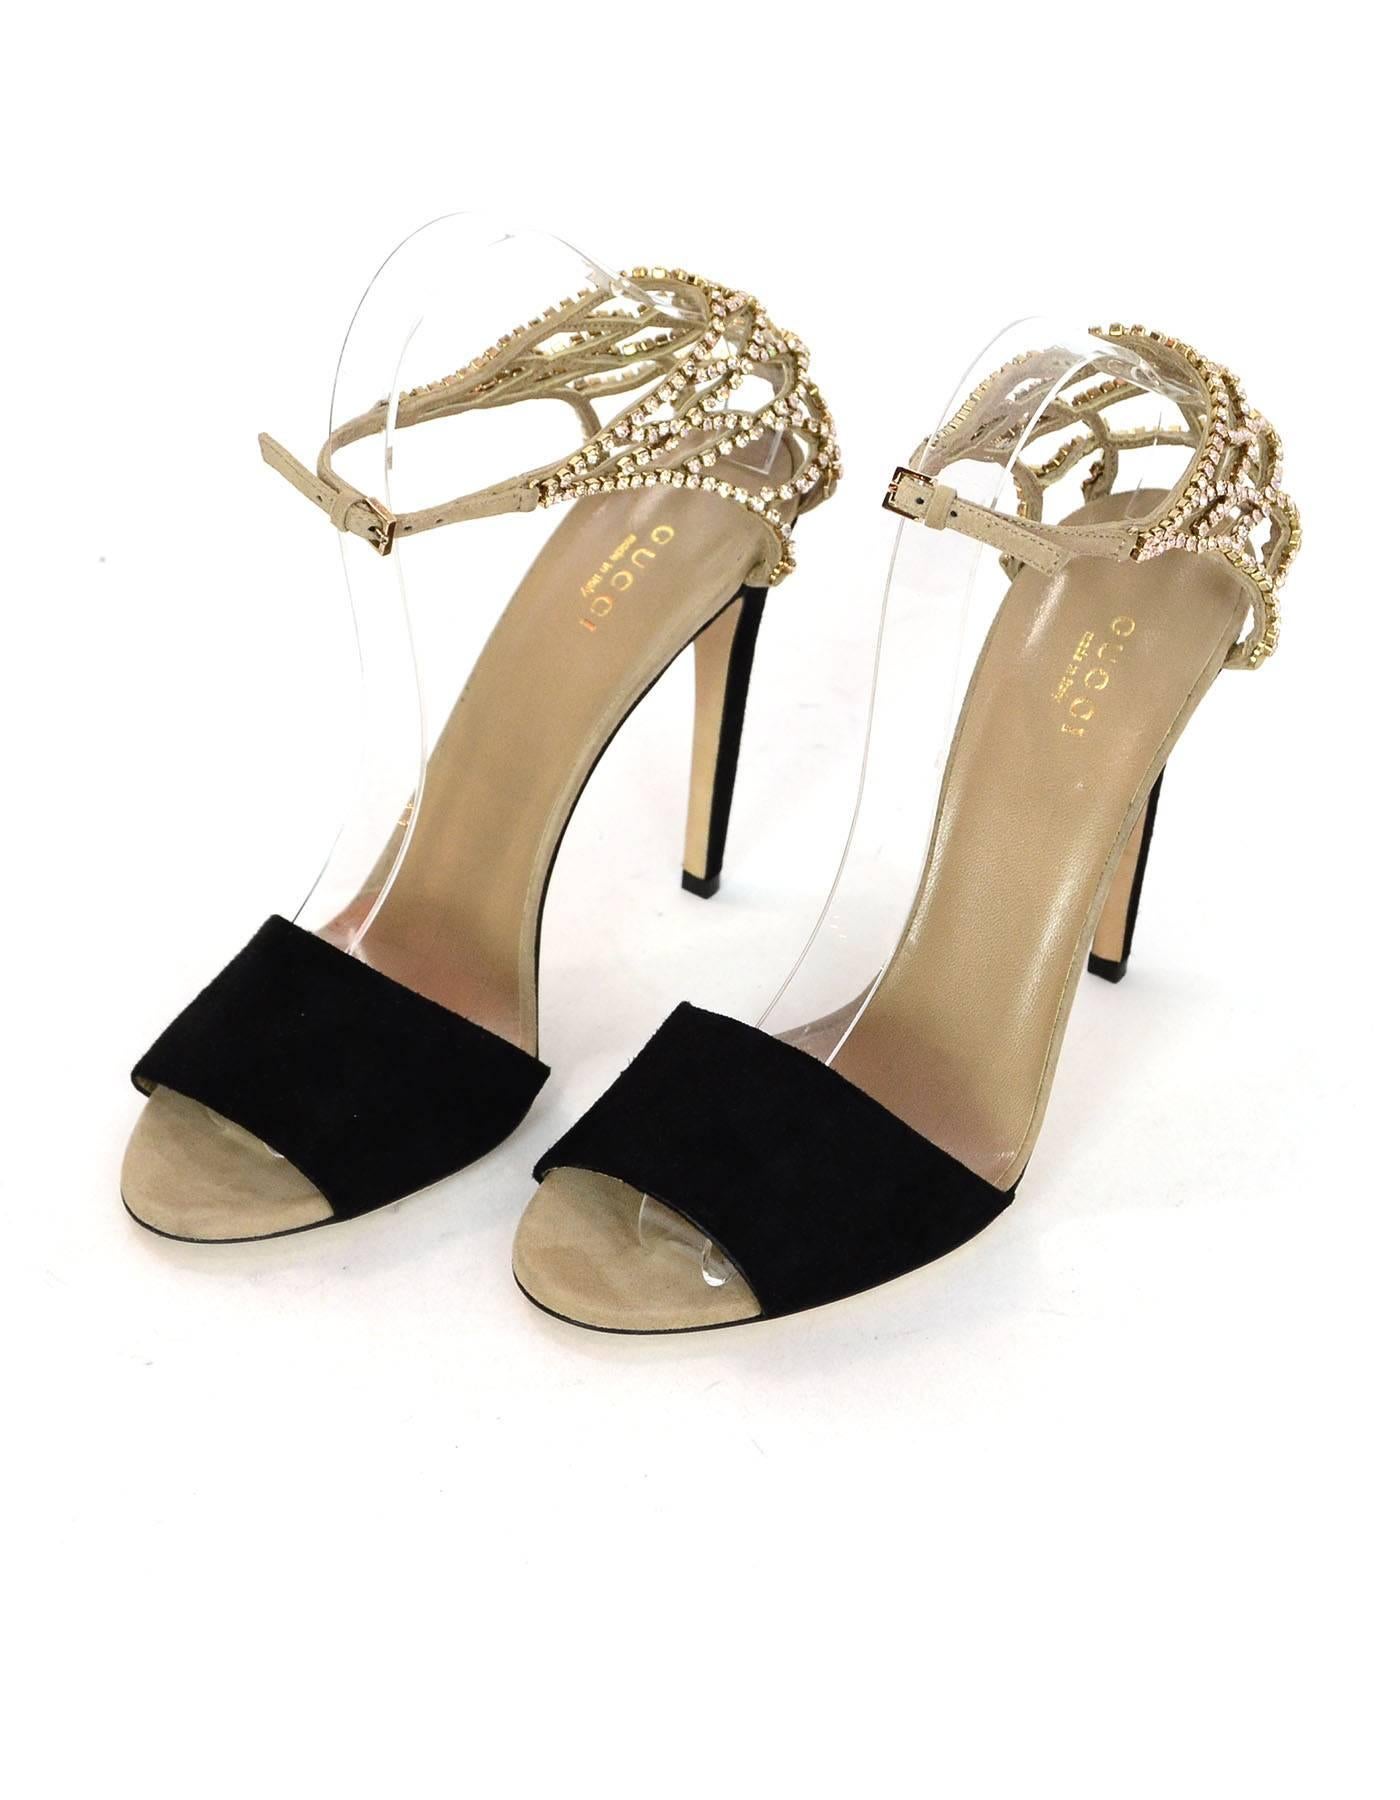 Gucci Black & Beige Suede & Crystal Sandals Sz 39 NEW

Made In: Italy
Color: Black, beige
Materials: Suede, crystal
Closure/Opening: Buckle closure at ankle
Sole Stamp: Gucci Made in Italy 39
Retail Price: $1,150 + tax
Overall Condition: Excellent